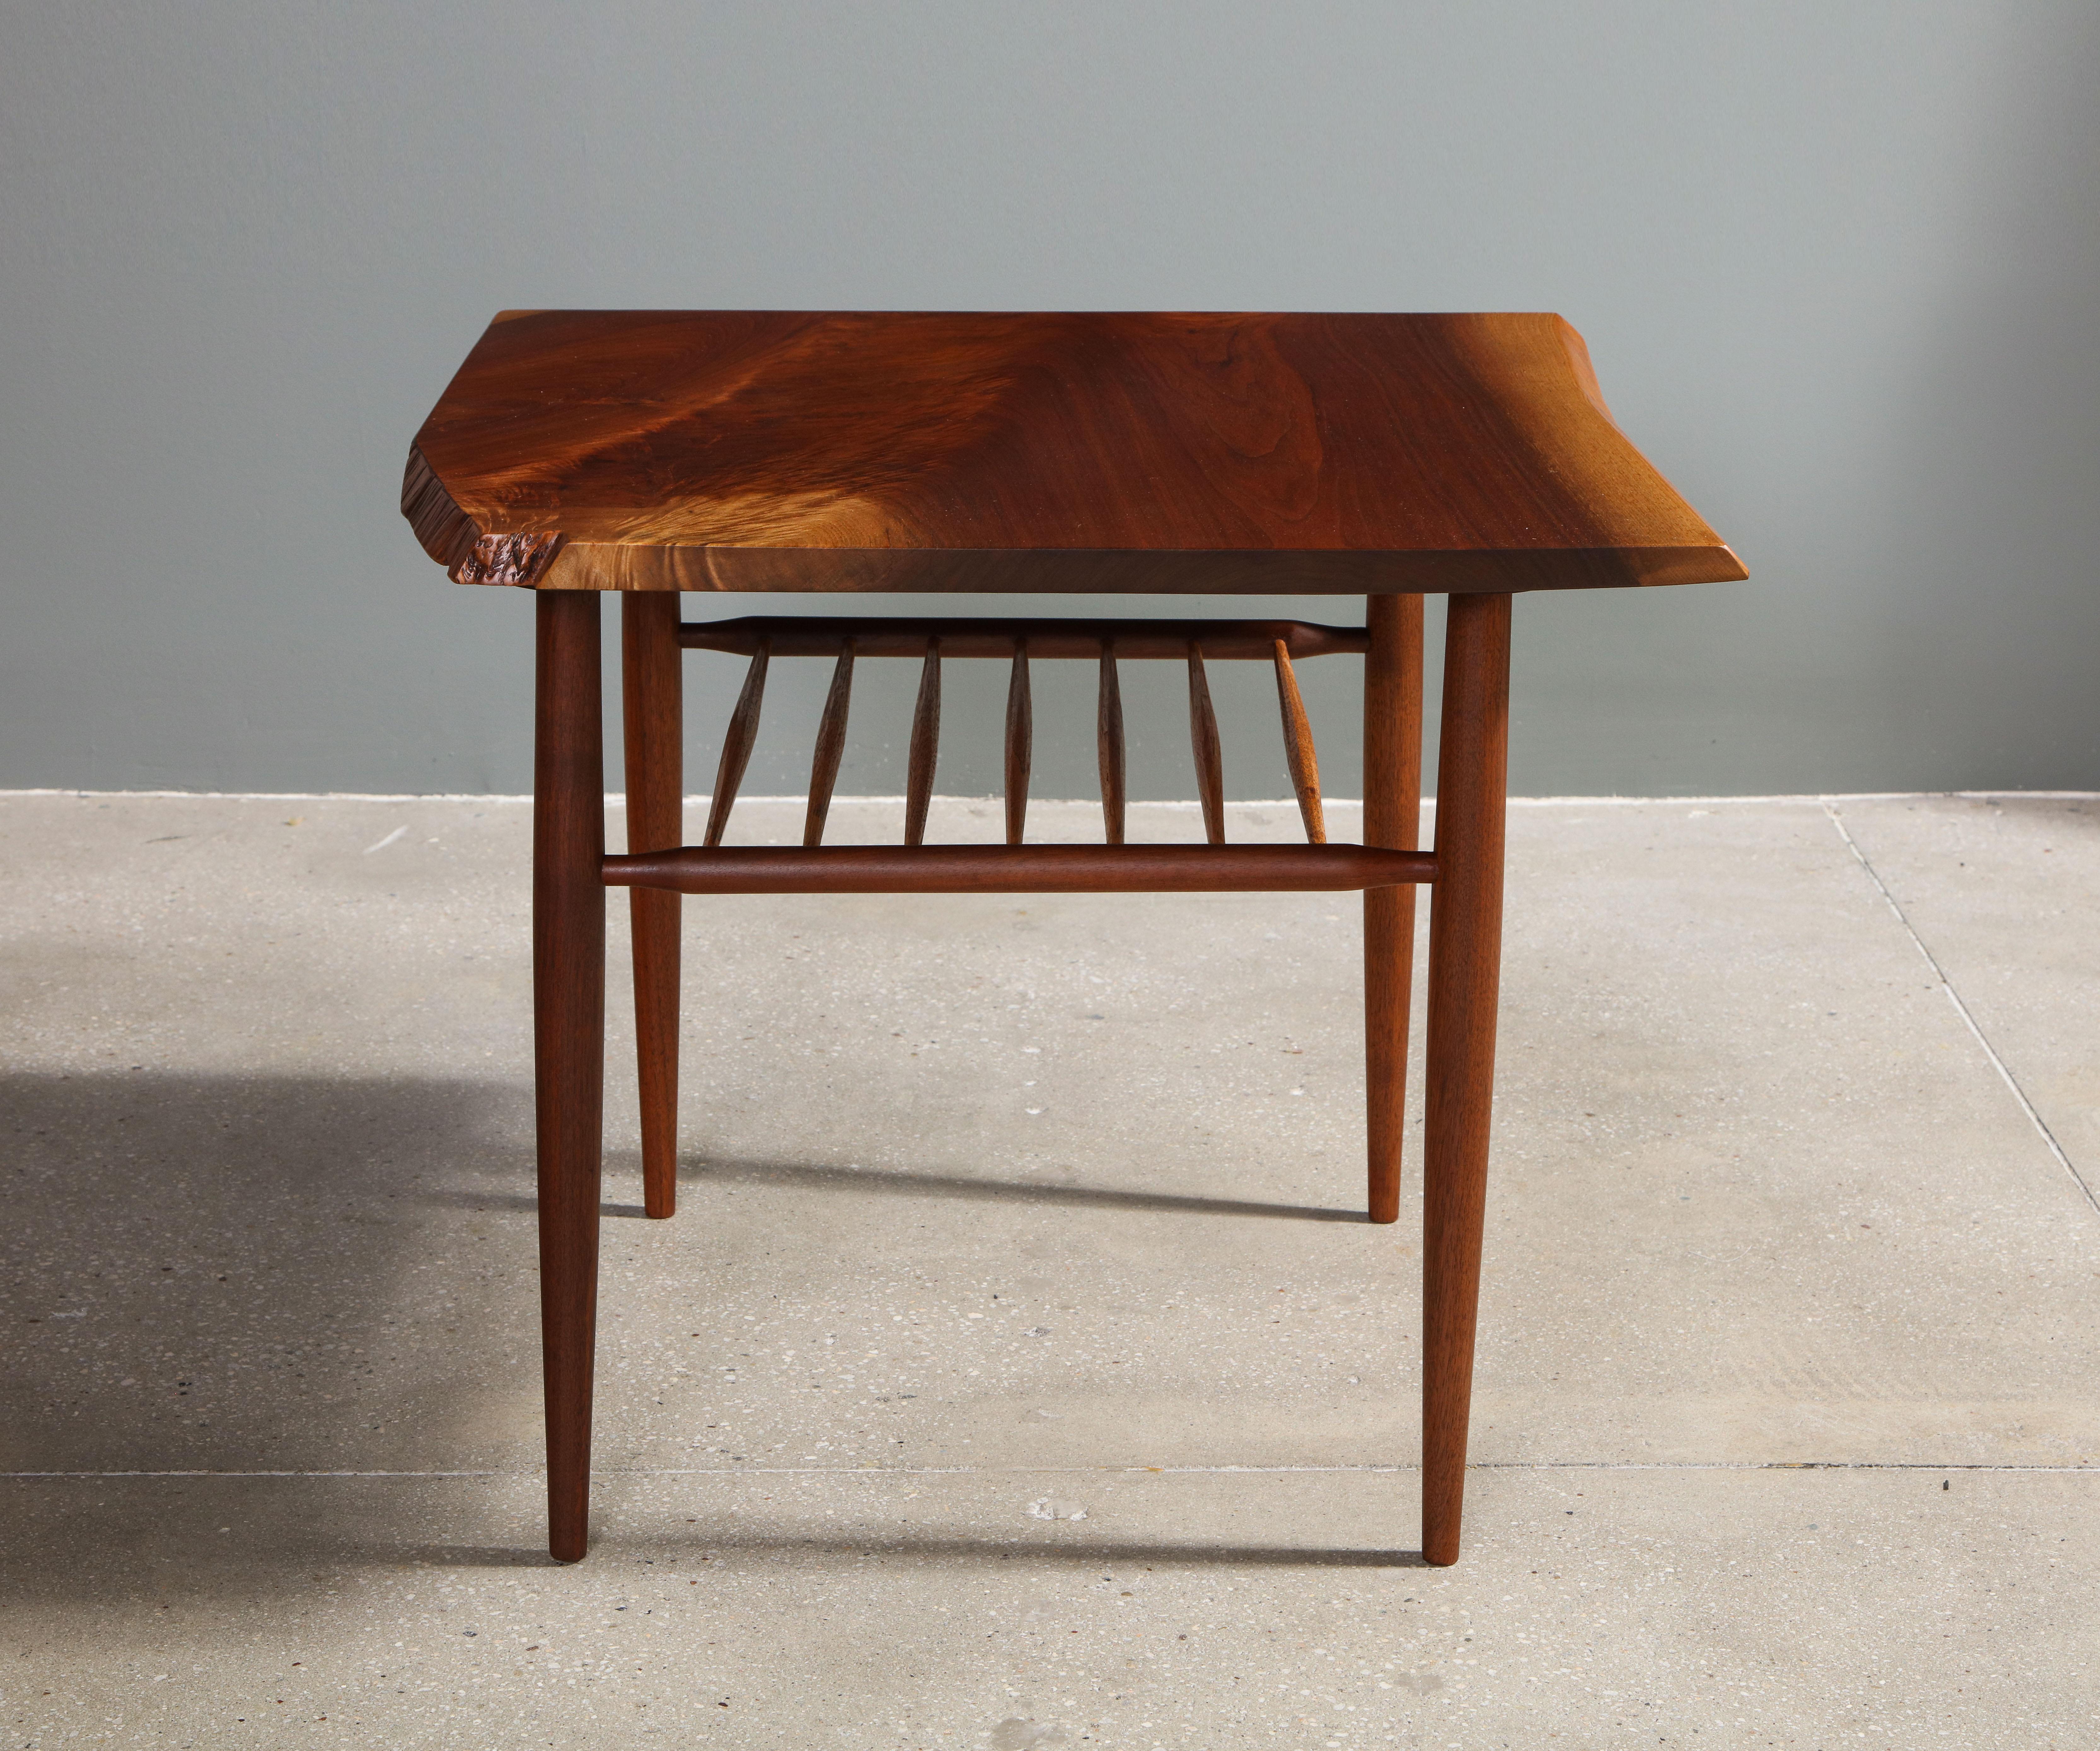 Walnut End Table with a Spindle Shelf, by George Nakashima 2